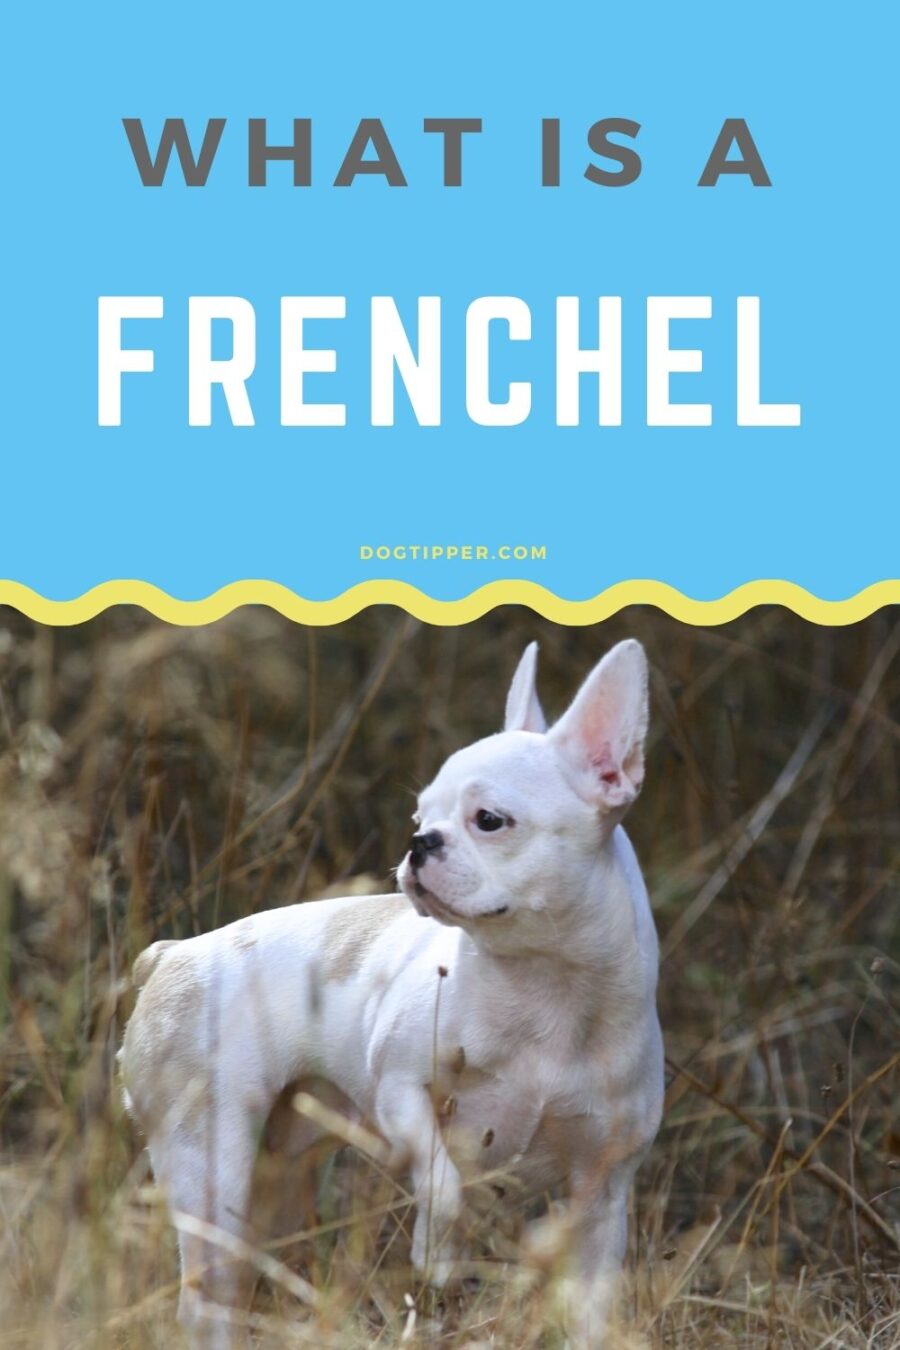 What is a Frenchel?